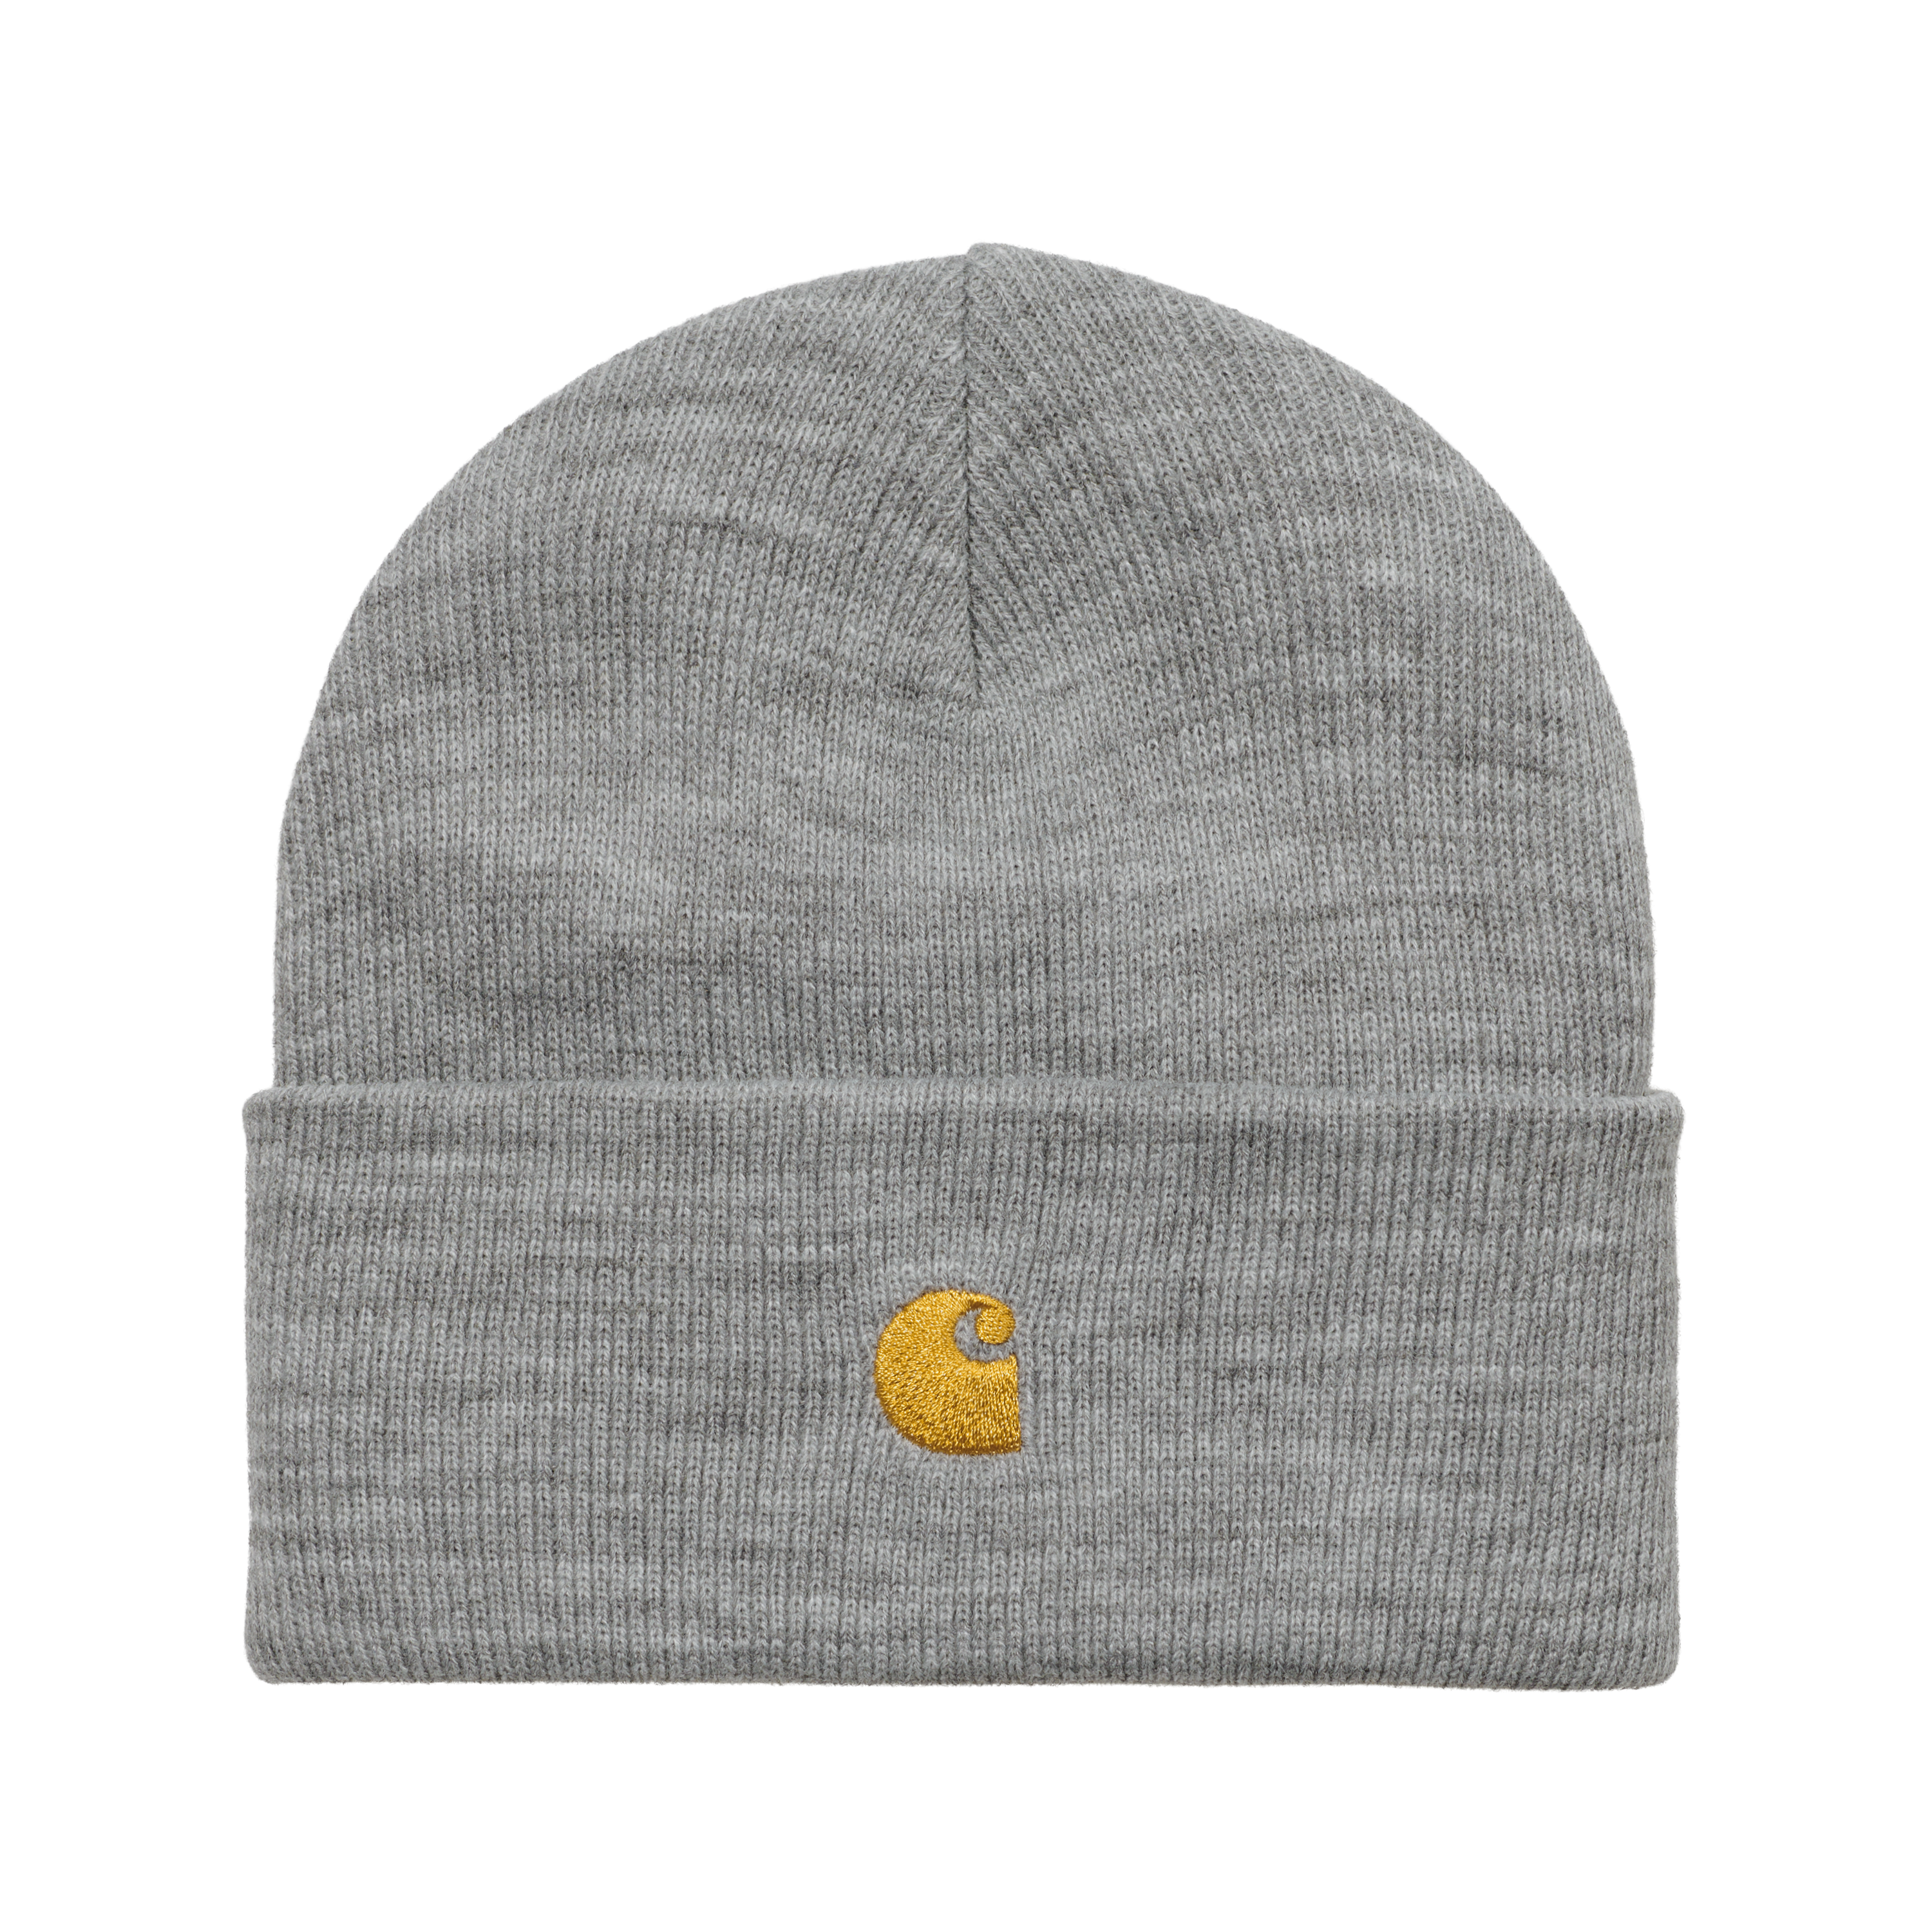 Accessoires  Carhartt Wip Chase beanie Grey Heather / Gold I026222.00M - Carhartt WIP  à  25,00 € chez Hype